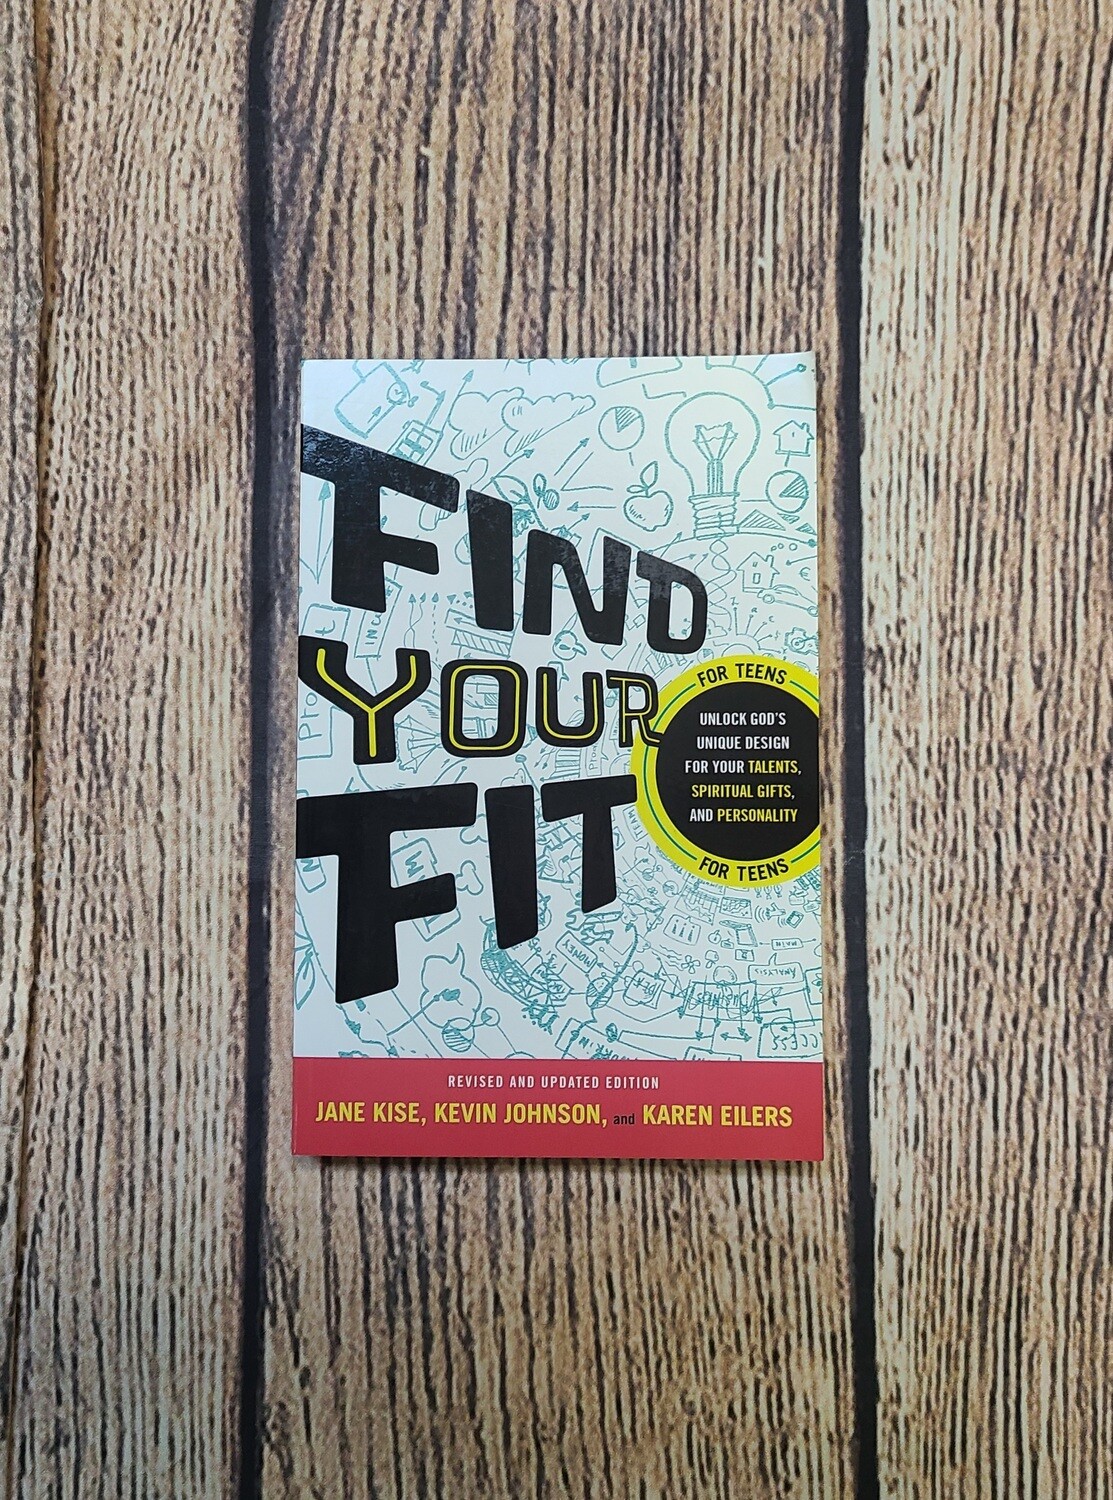 Find Your Fit: Unlock God's Unique Design for Your Talents, Spiritual Gifts, and Personality by Jane Kise, Kevin Johnson, and Karen Eilers